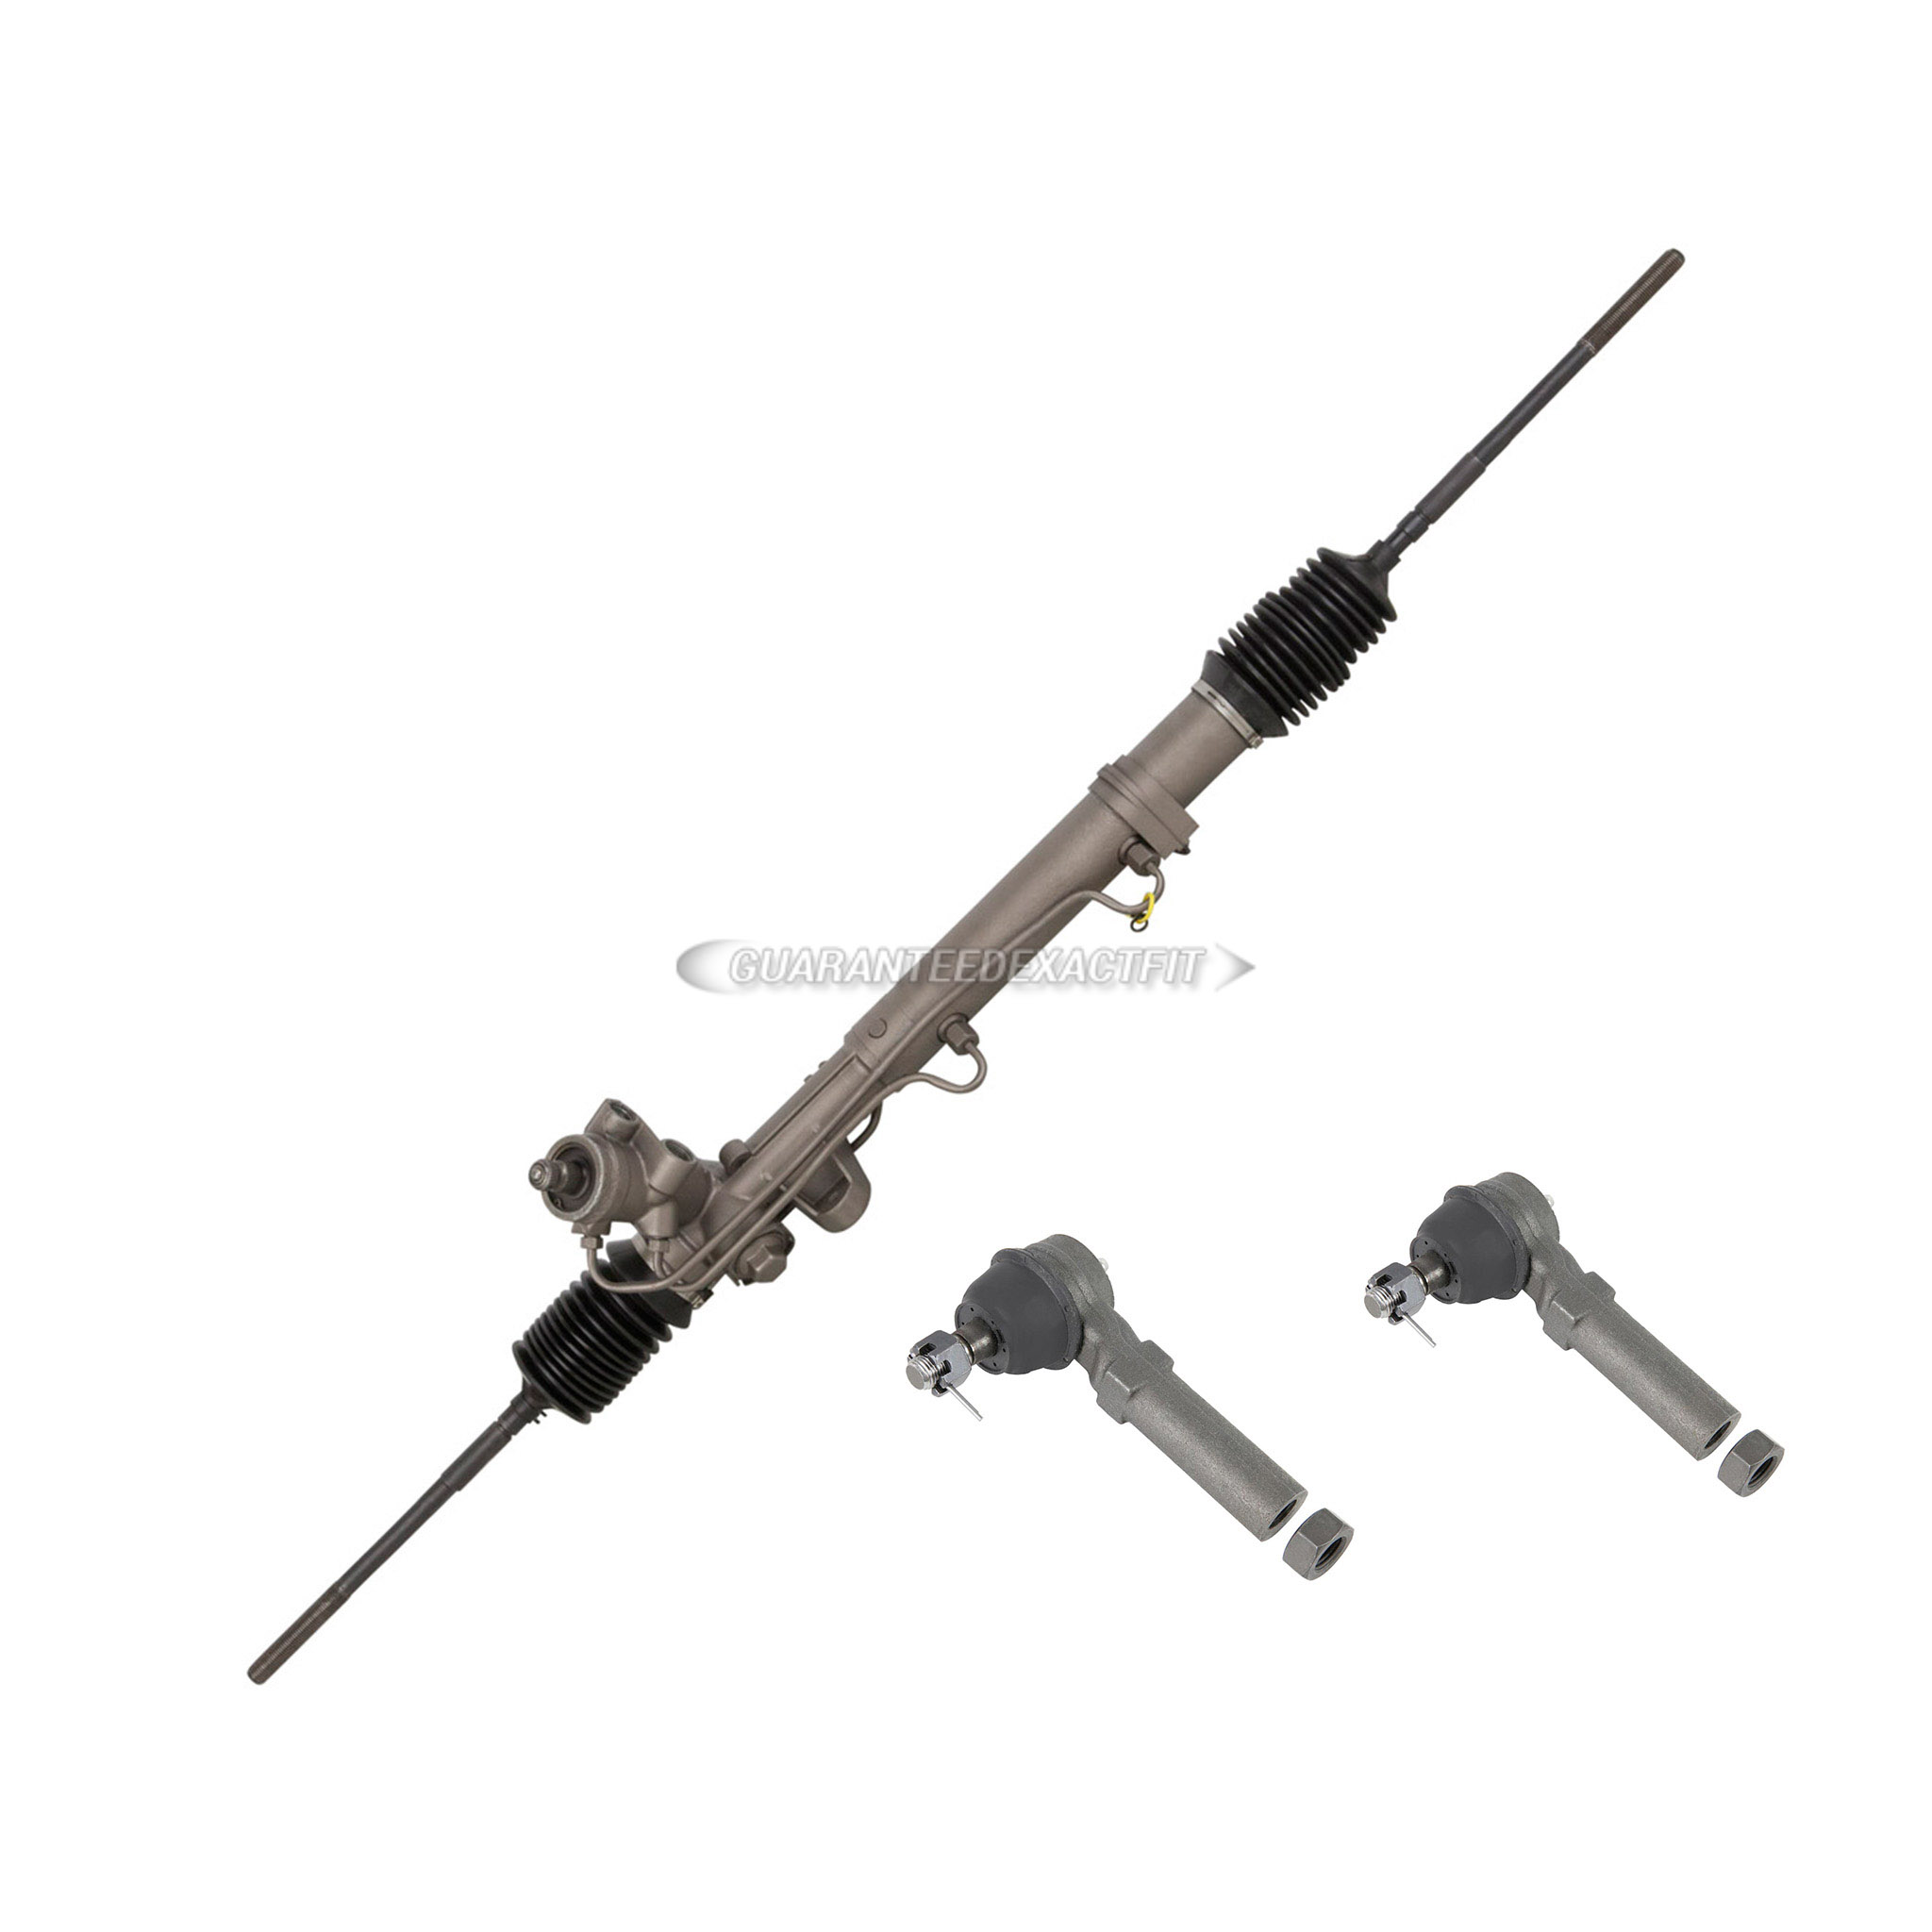  Dodge lancer rack and pinion and outer tie rod kit 